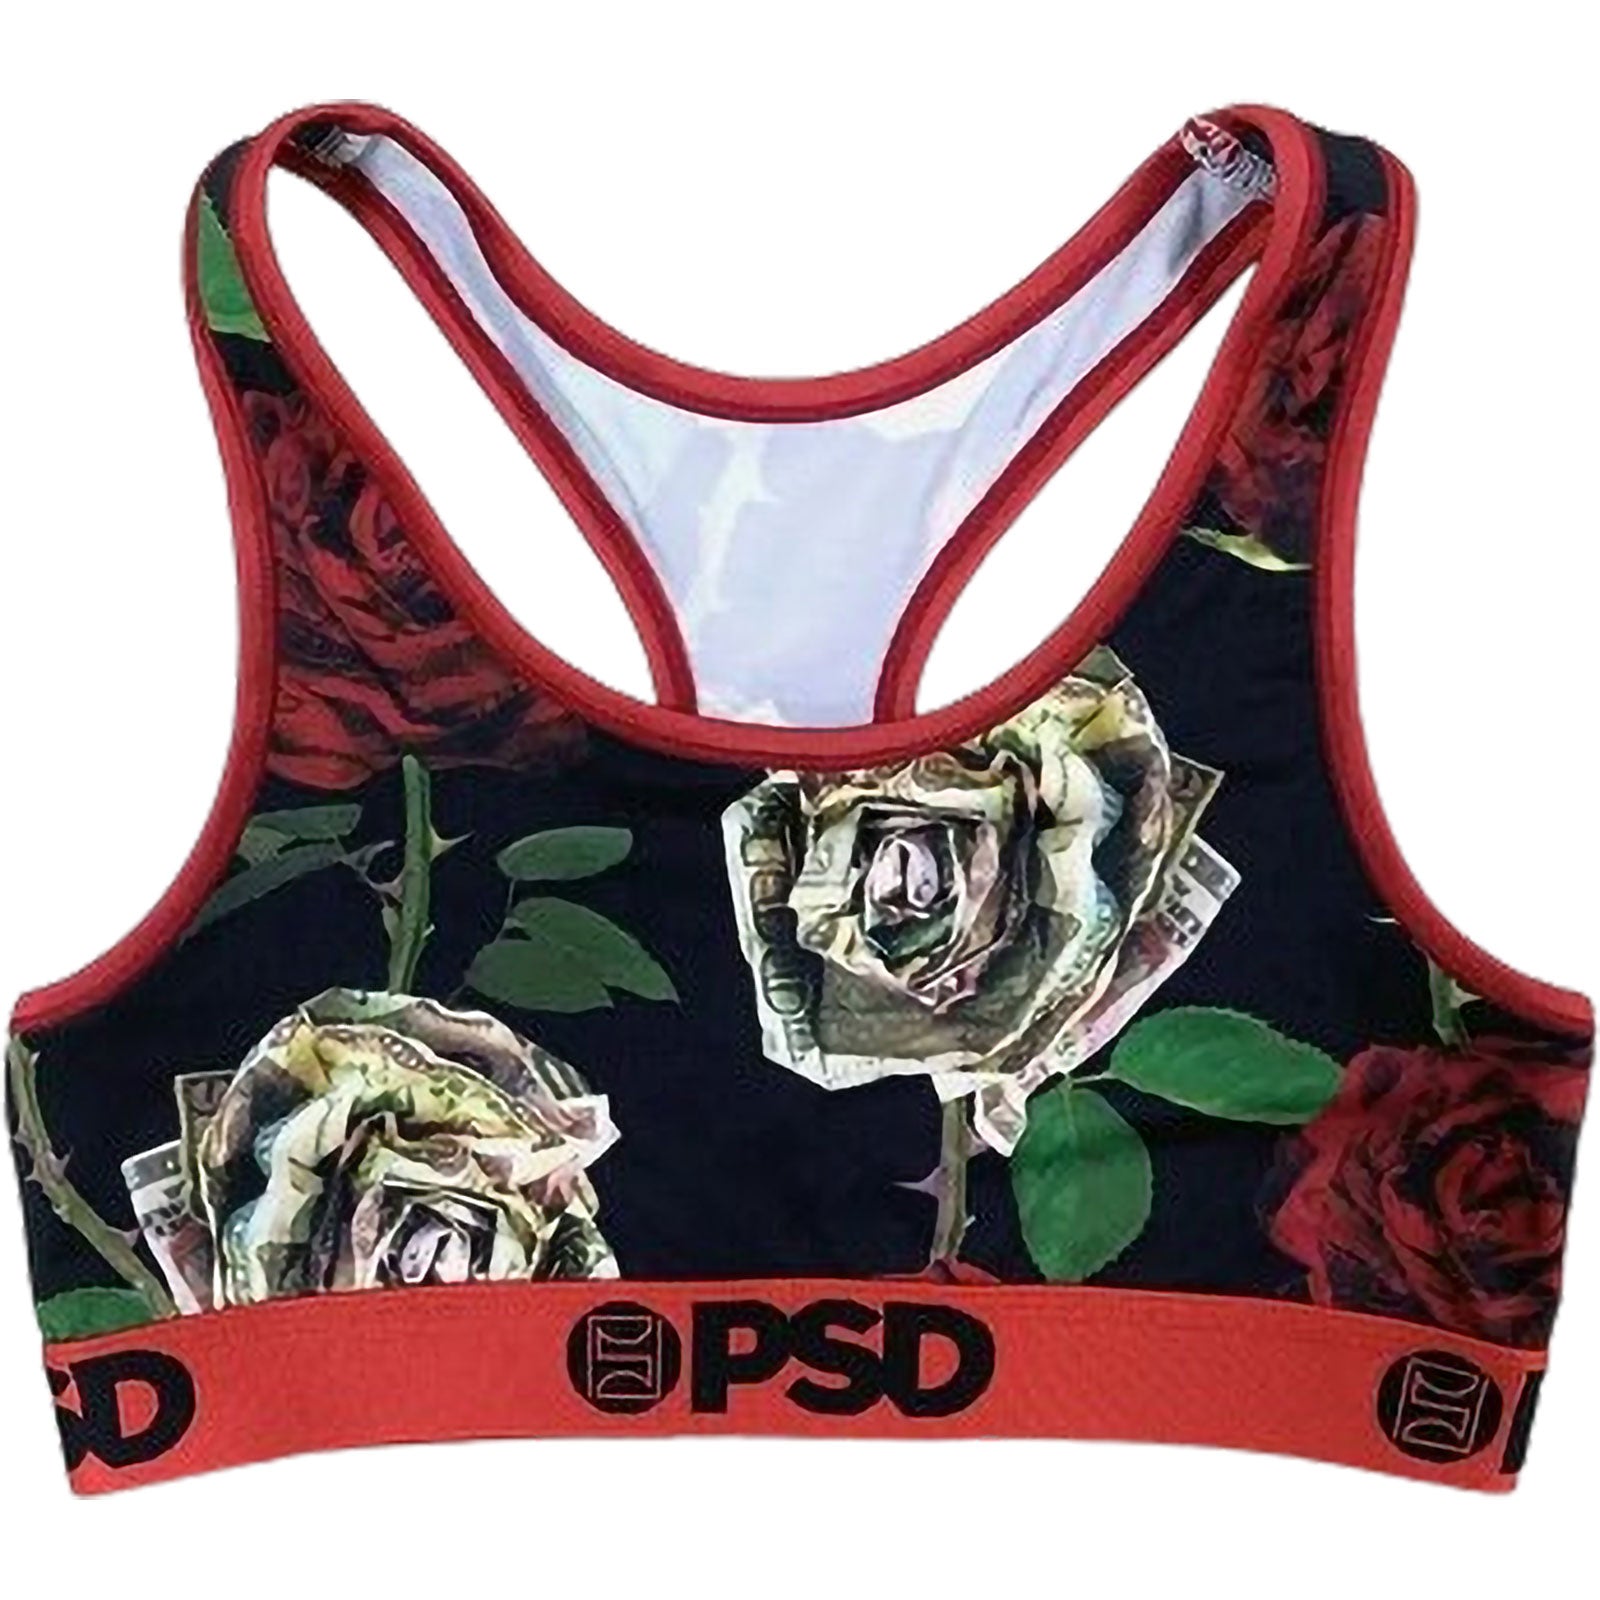 PSD 100 Roses Mix Sports Bra Women's Top Underwear (Refurbished, Witho –